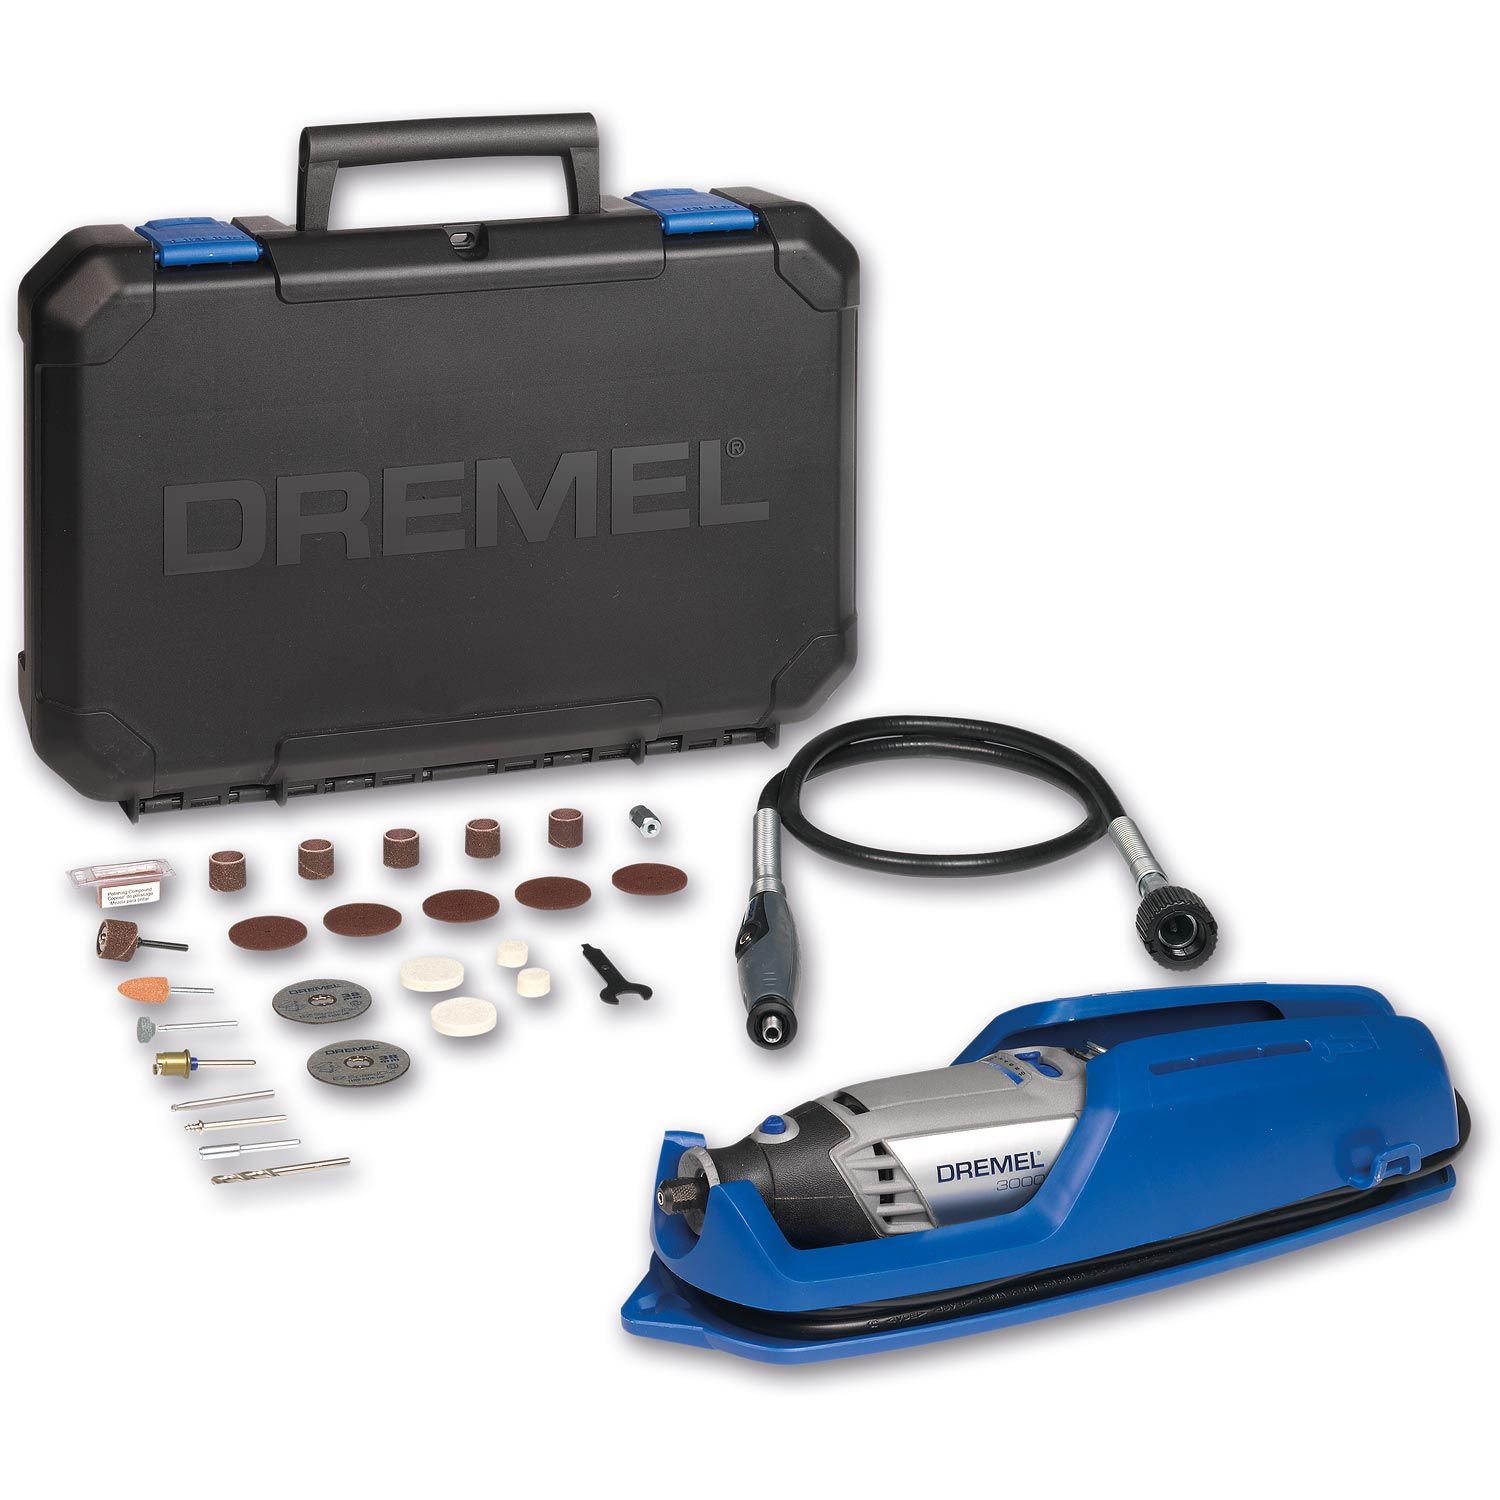 Dremel 3000-1/25 Variable Speed Rotary Tool Kit- 1 Attachment and 25  Accessories- Grinder, Mini Sander, Polisher, Router, Engraver- Perfect for